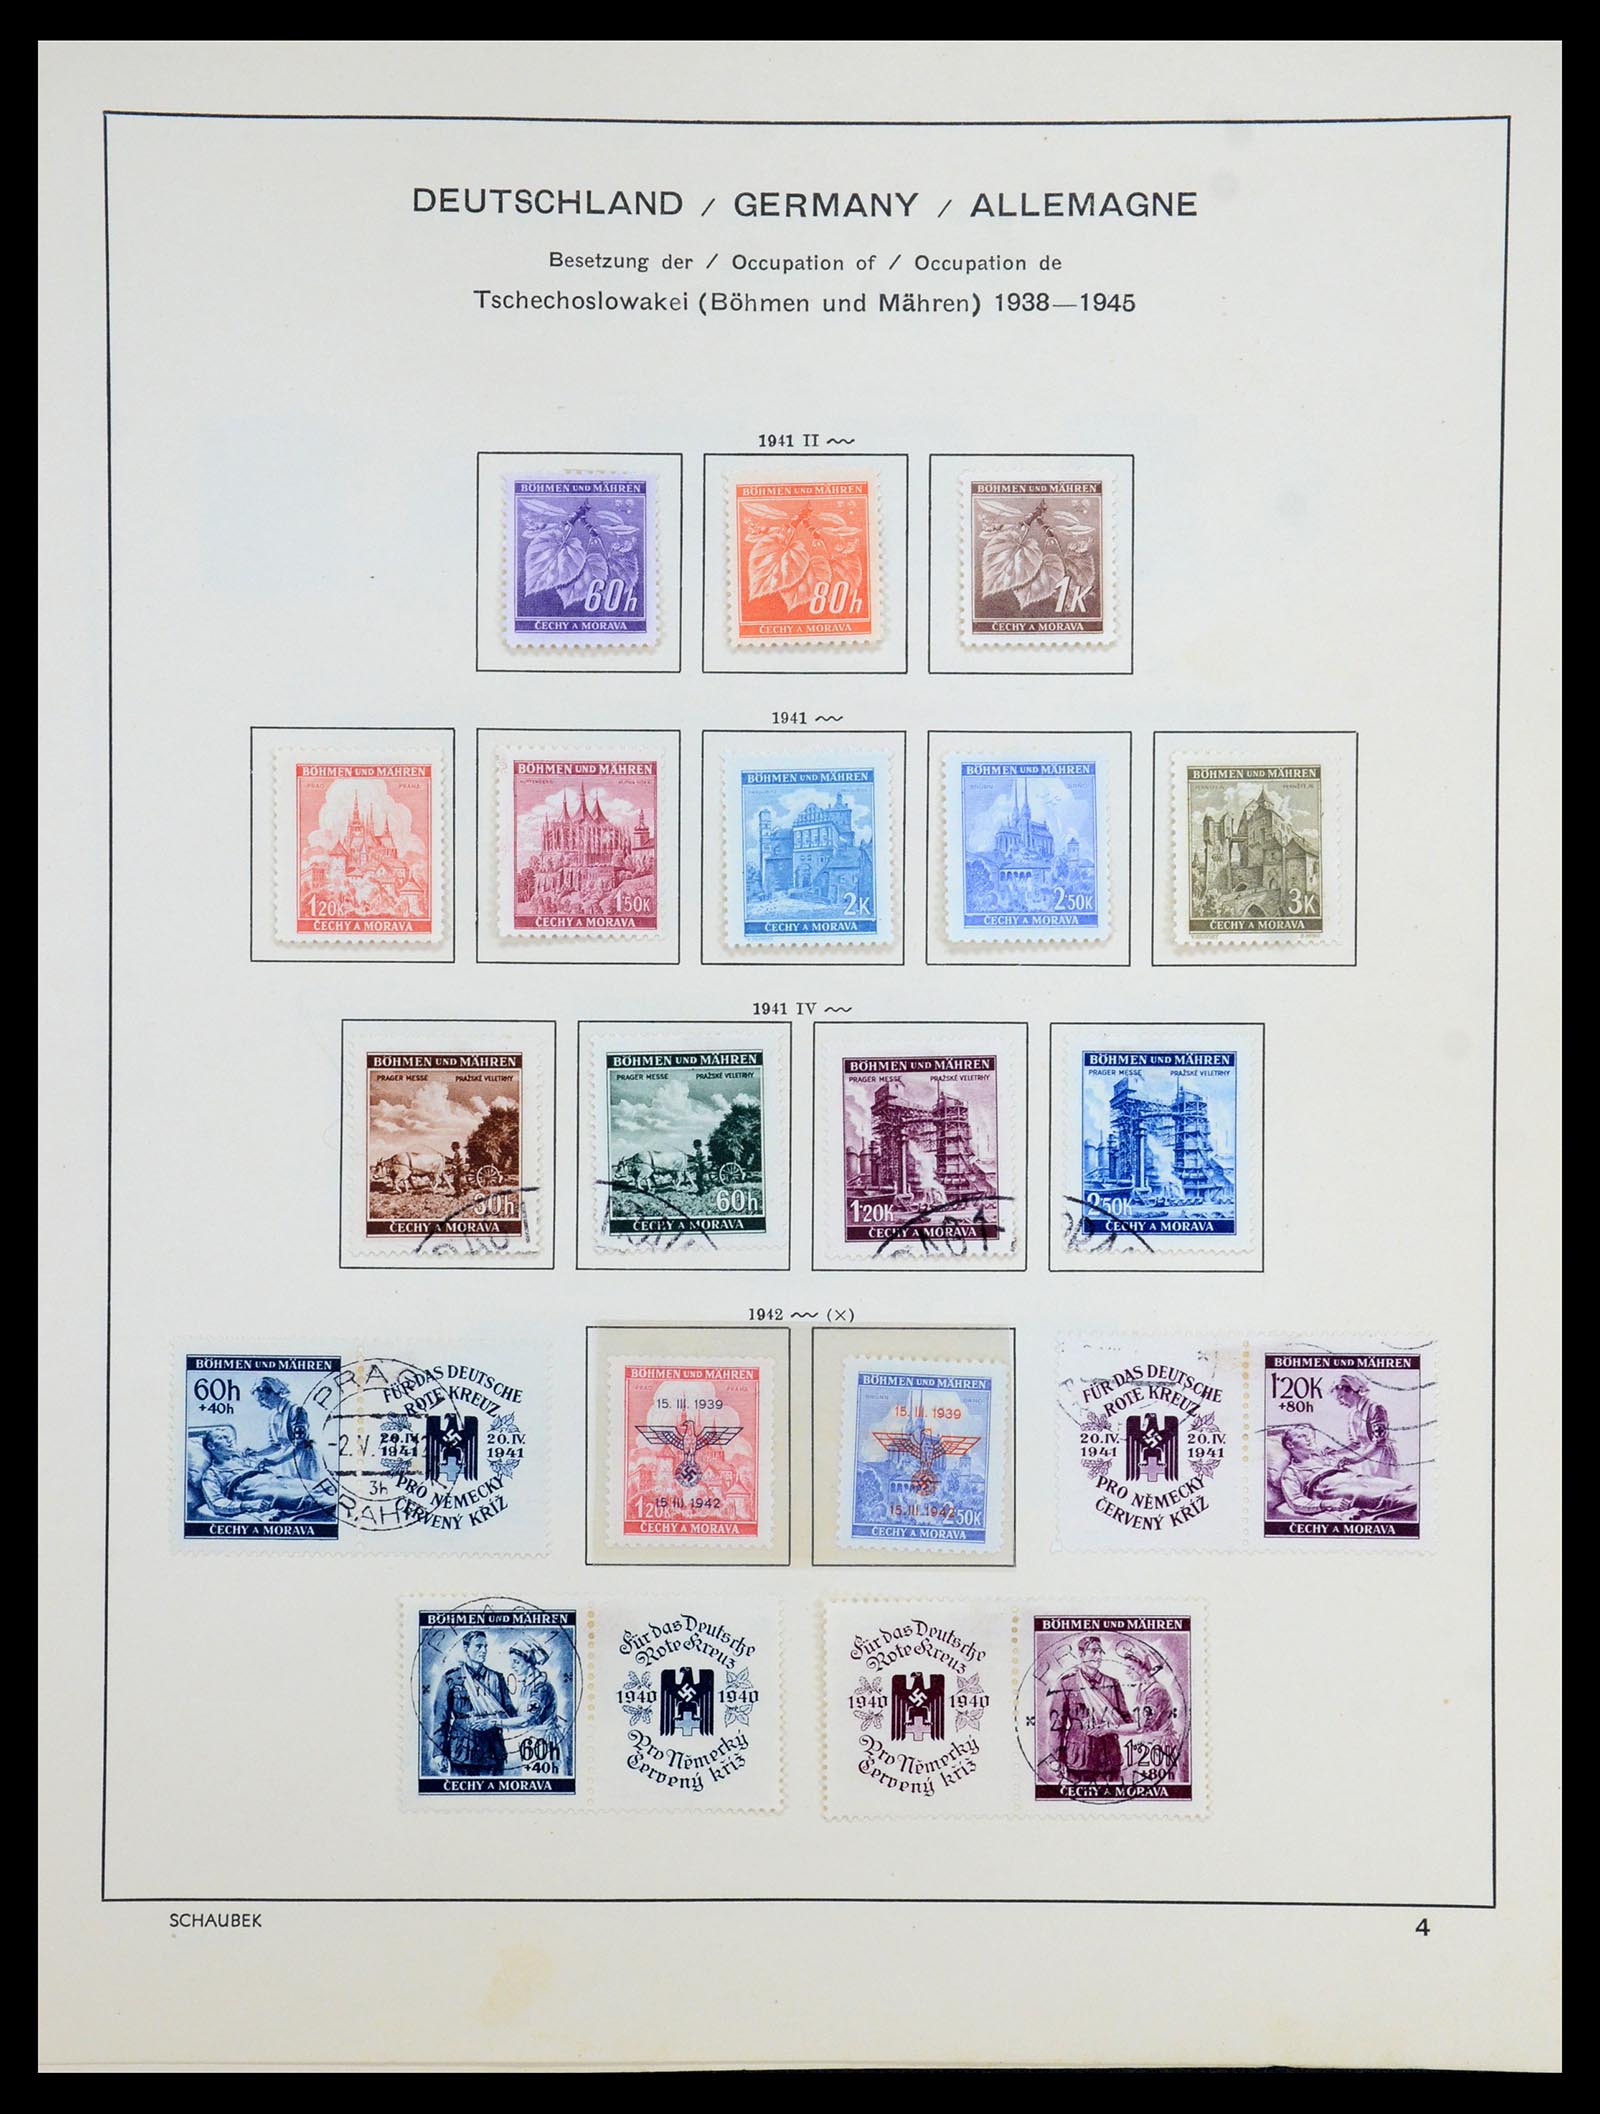 35964 024 - Stamp collection 35964 Germany occupations WW II 1939-1945.